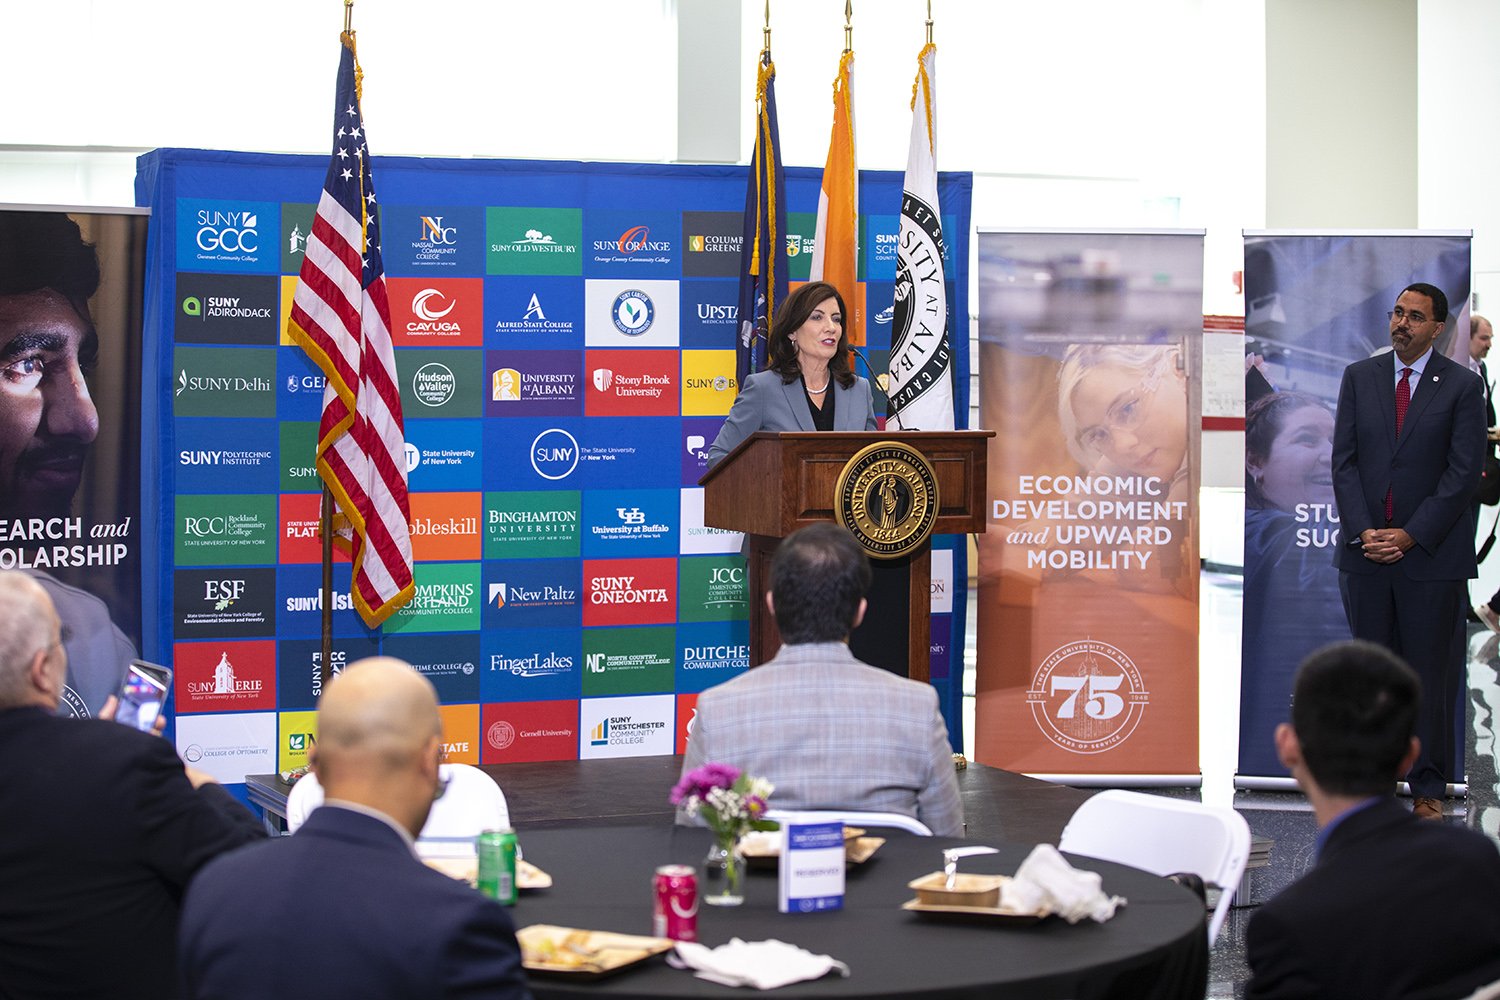 Gov. Cathy Hochul announces a new partnership between UAlbany and IBM at the SUNY AI Symposium on Oct. 16. (Photo by Patrick Dodson)